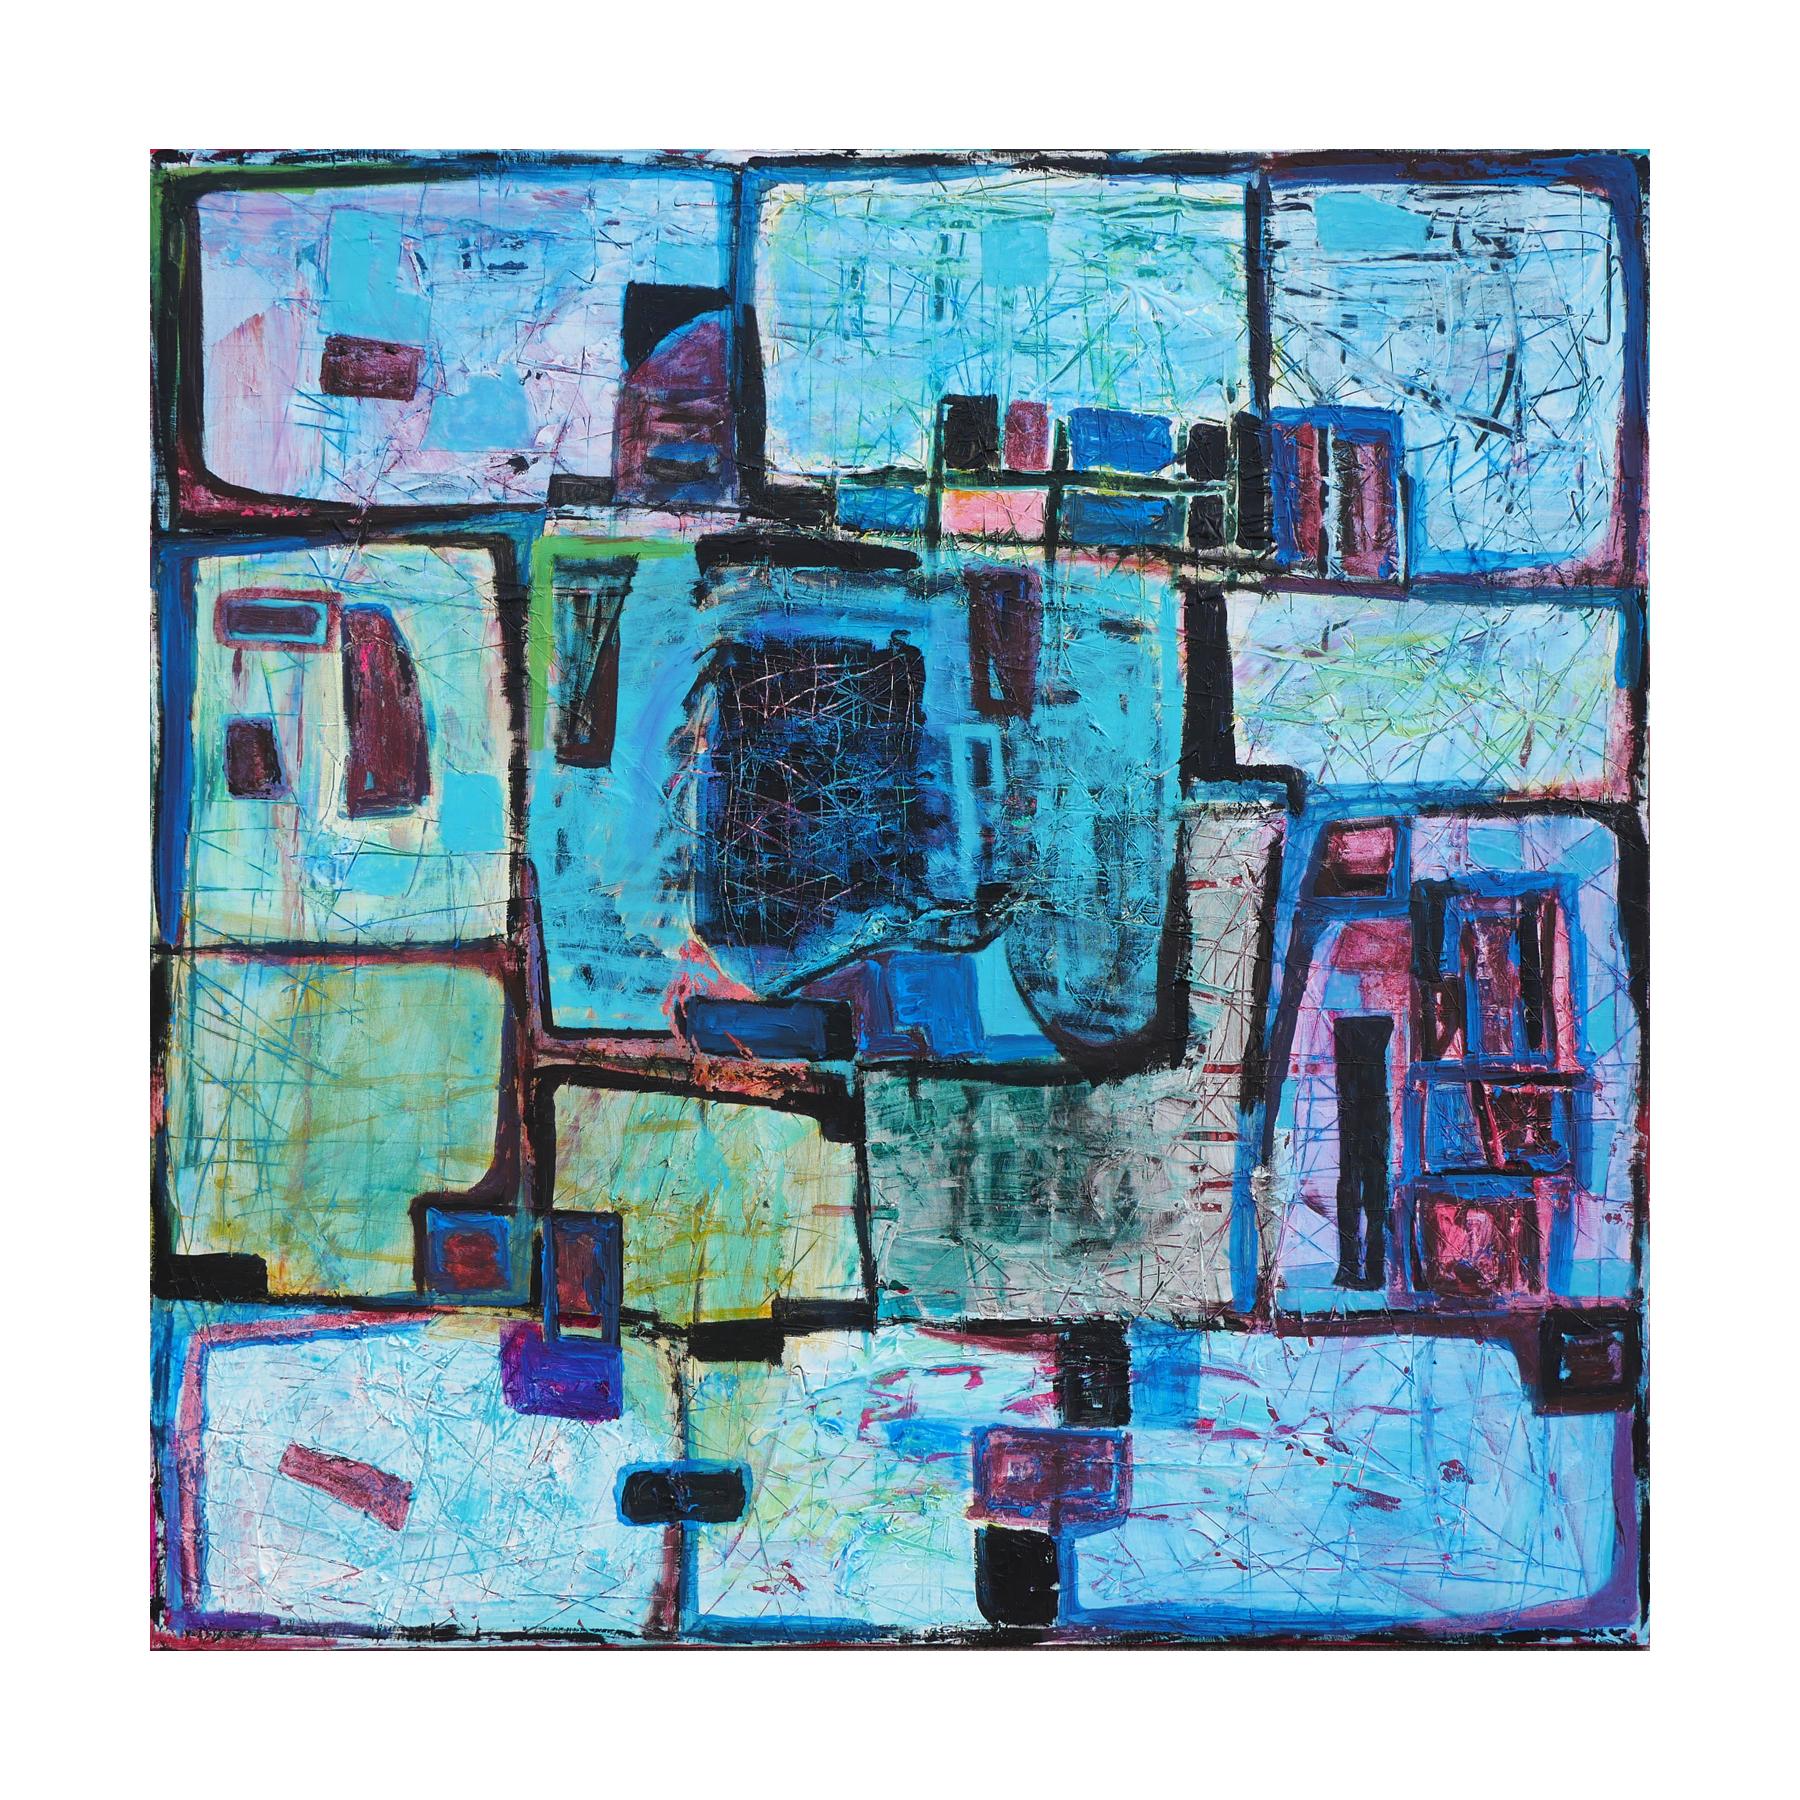 Blue, green, and pink abstract Cubist style painting by Texas artist Paul Reeves. The work features the geometric structure of traditional Cubism, combined with the brushwork of abstract expressionism. Signed by artist on the back. Currently